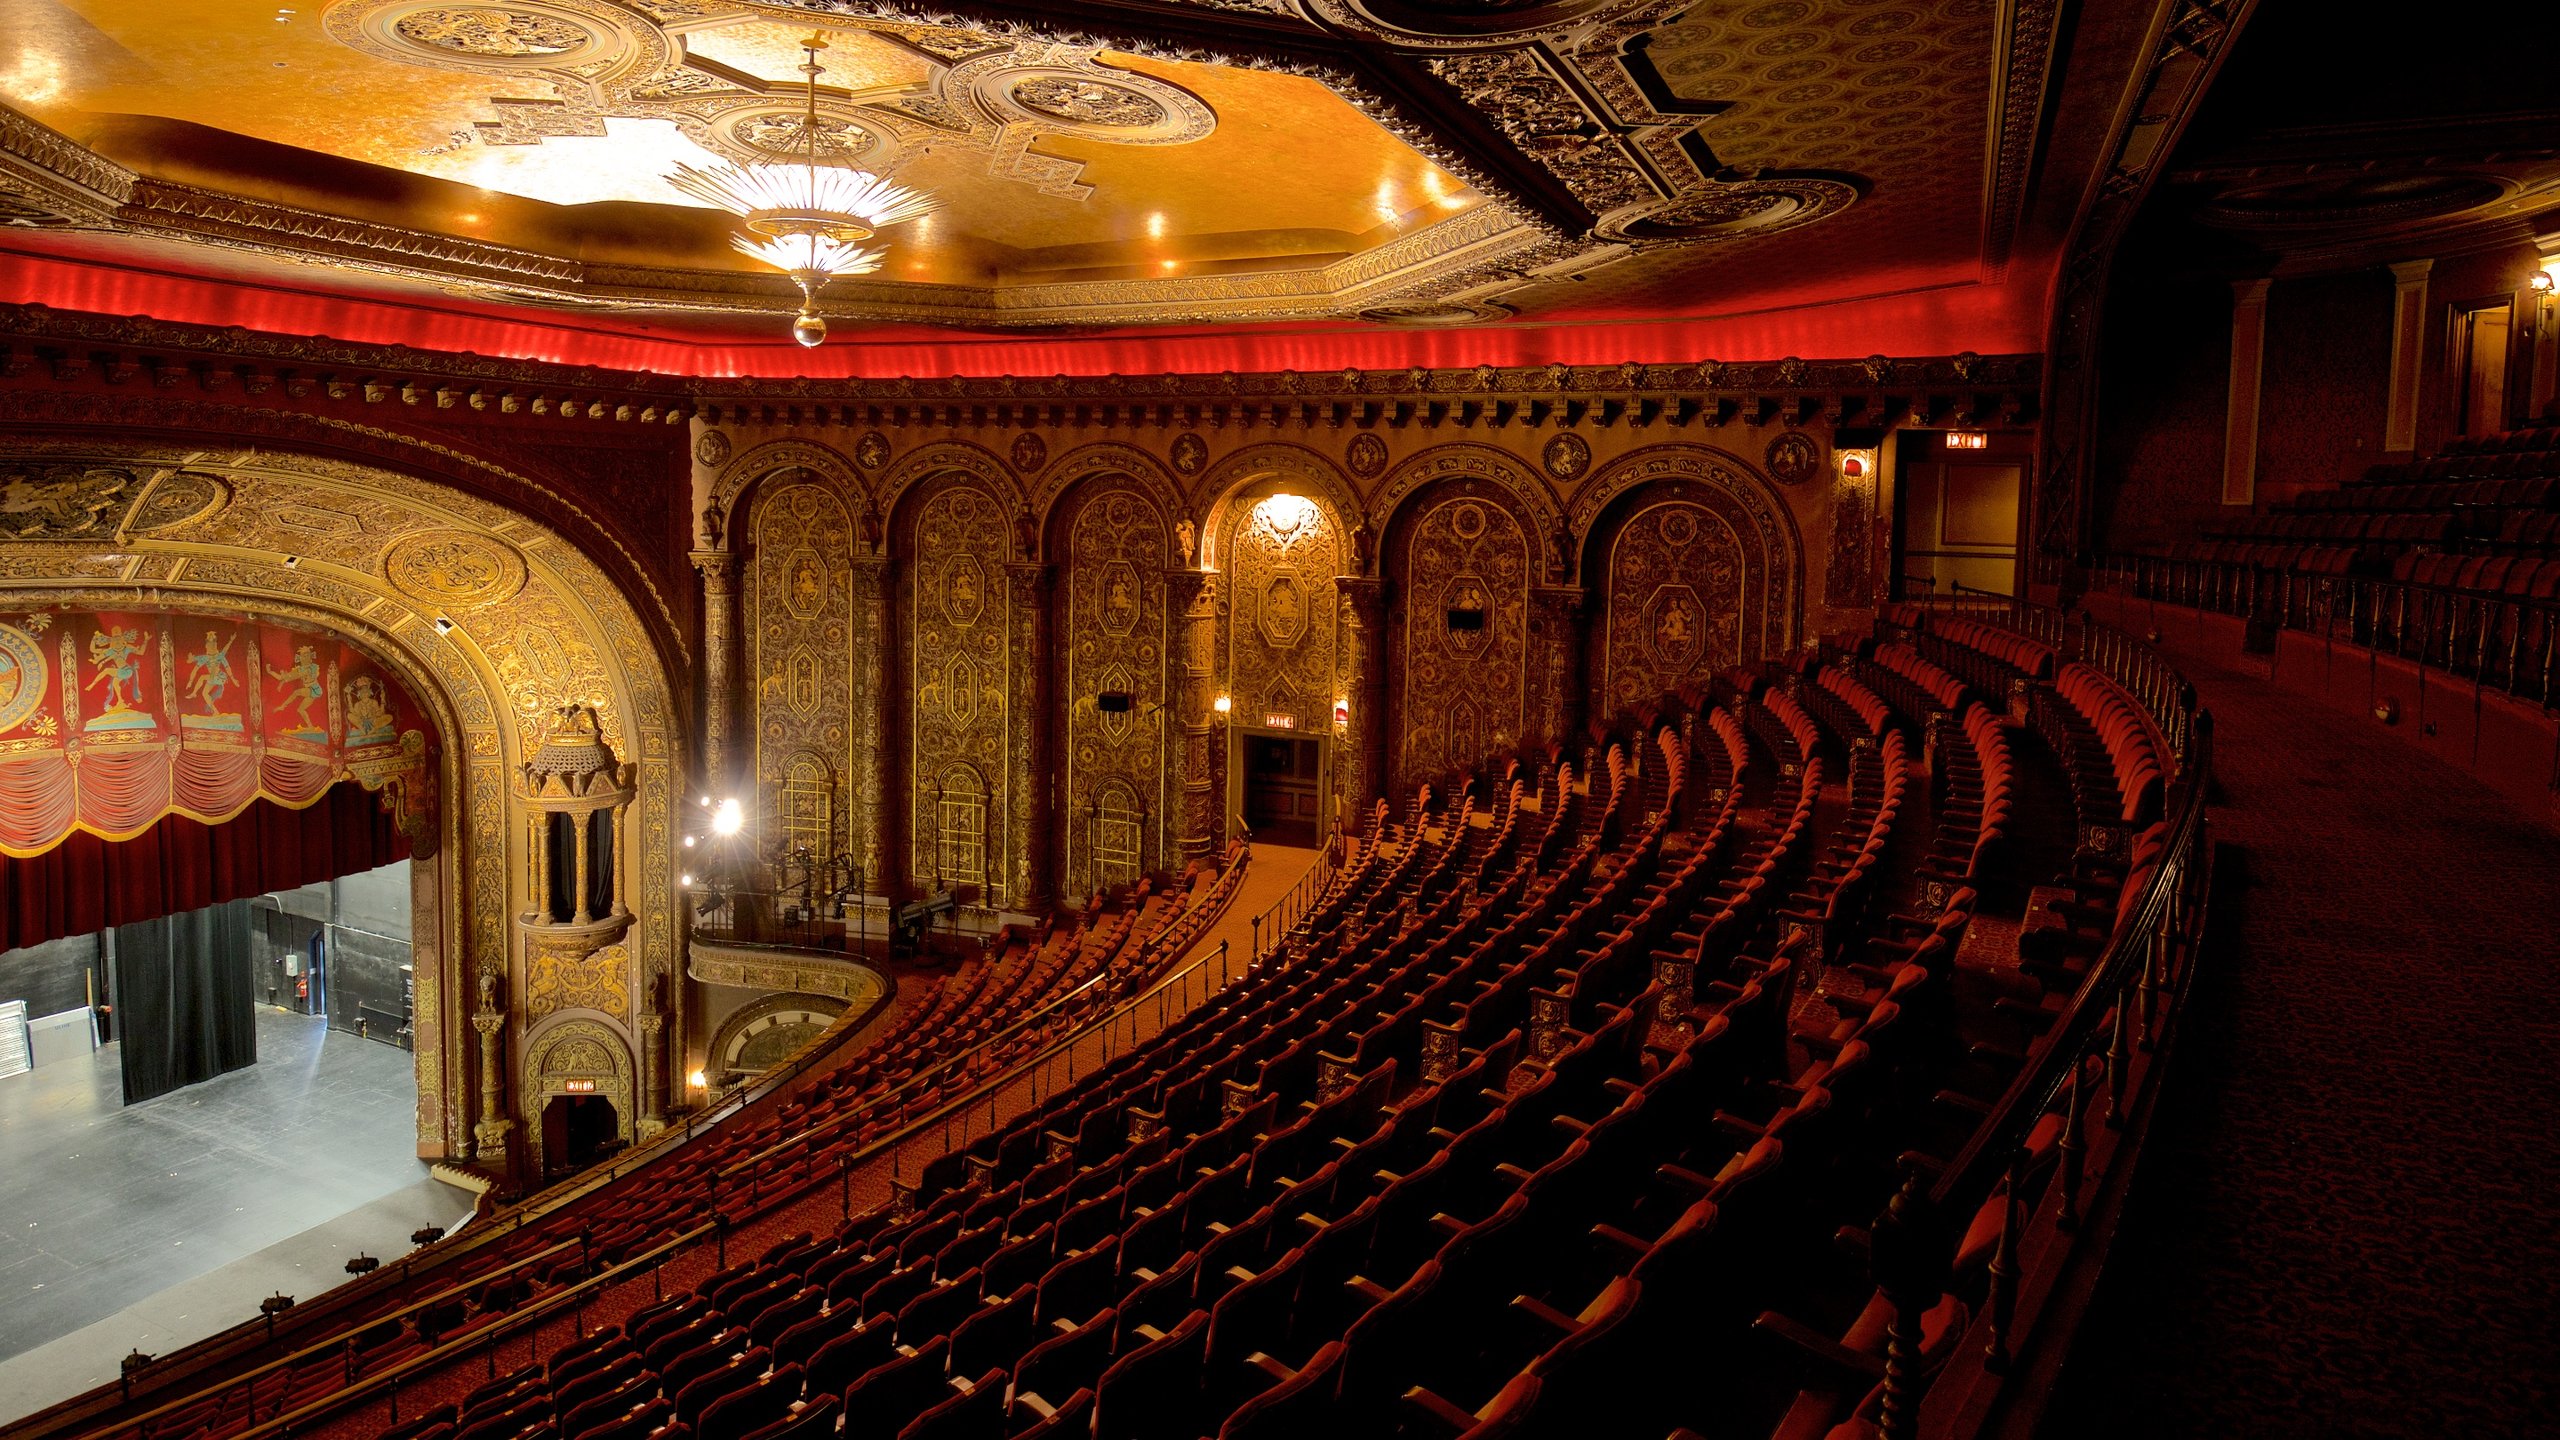 christina vogler recommends theaters in syracuse ny pic